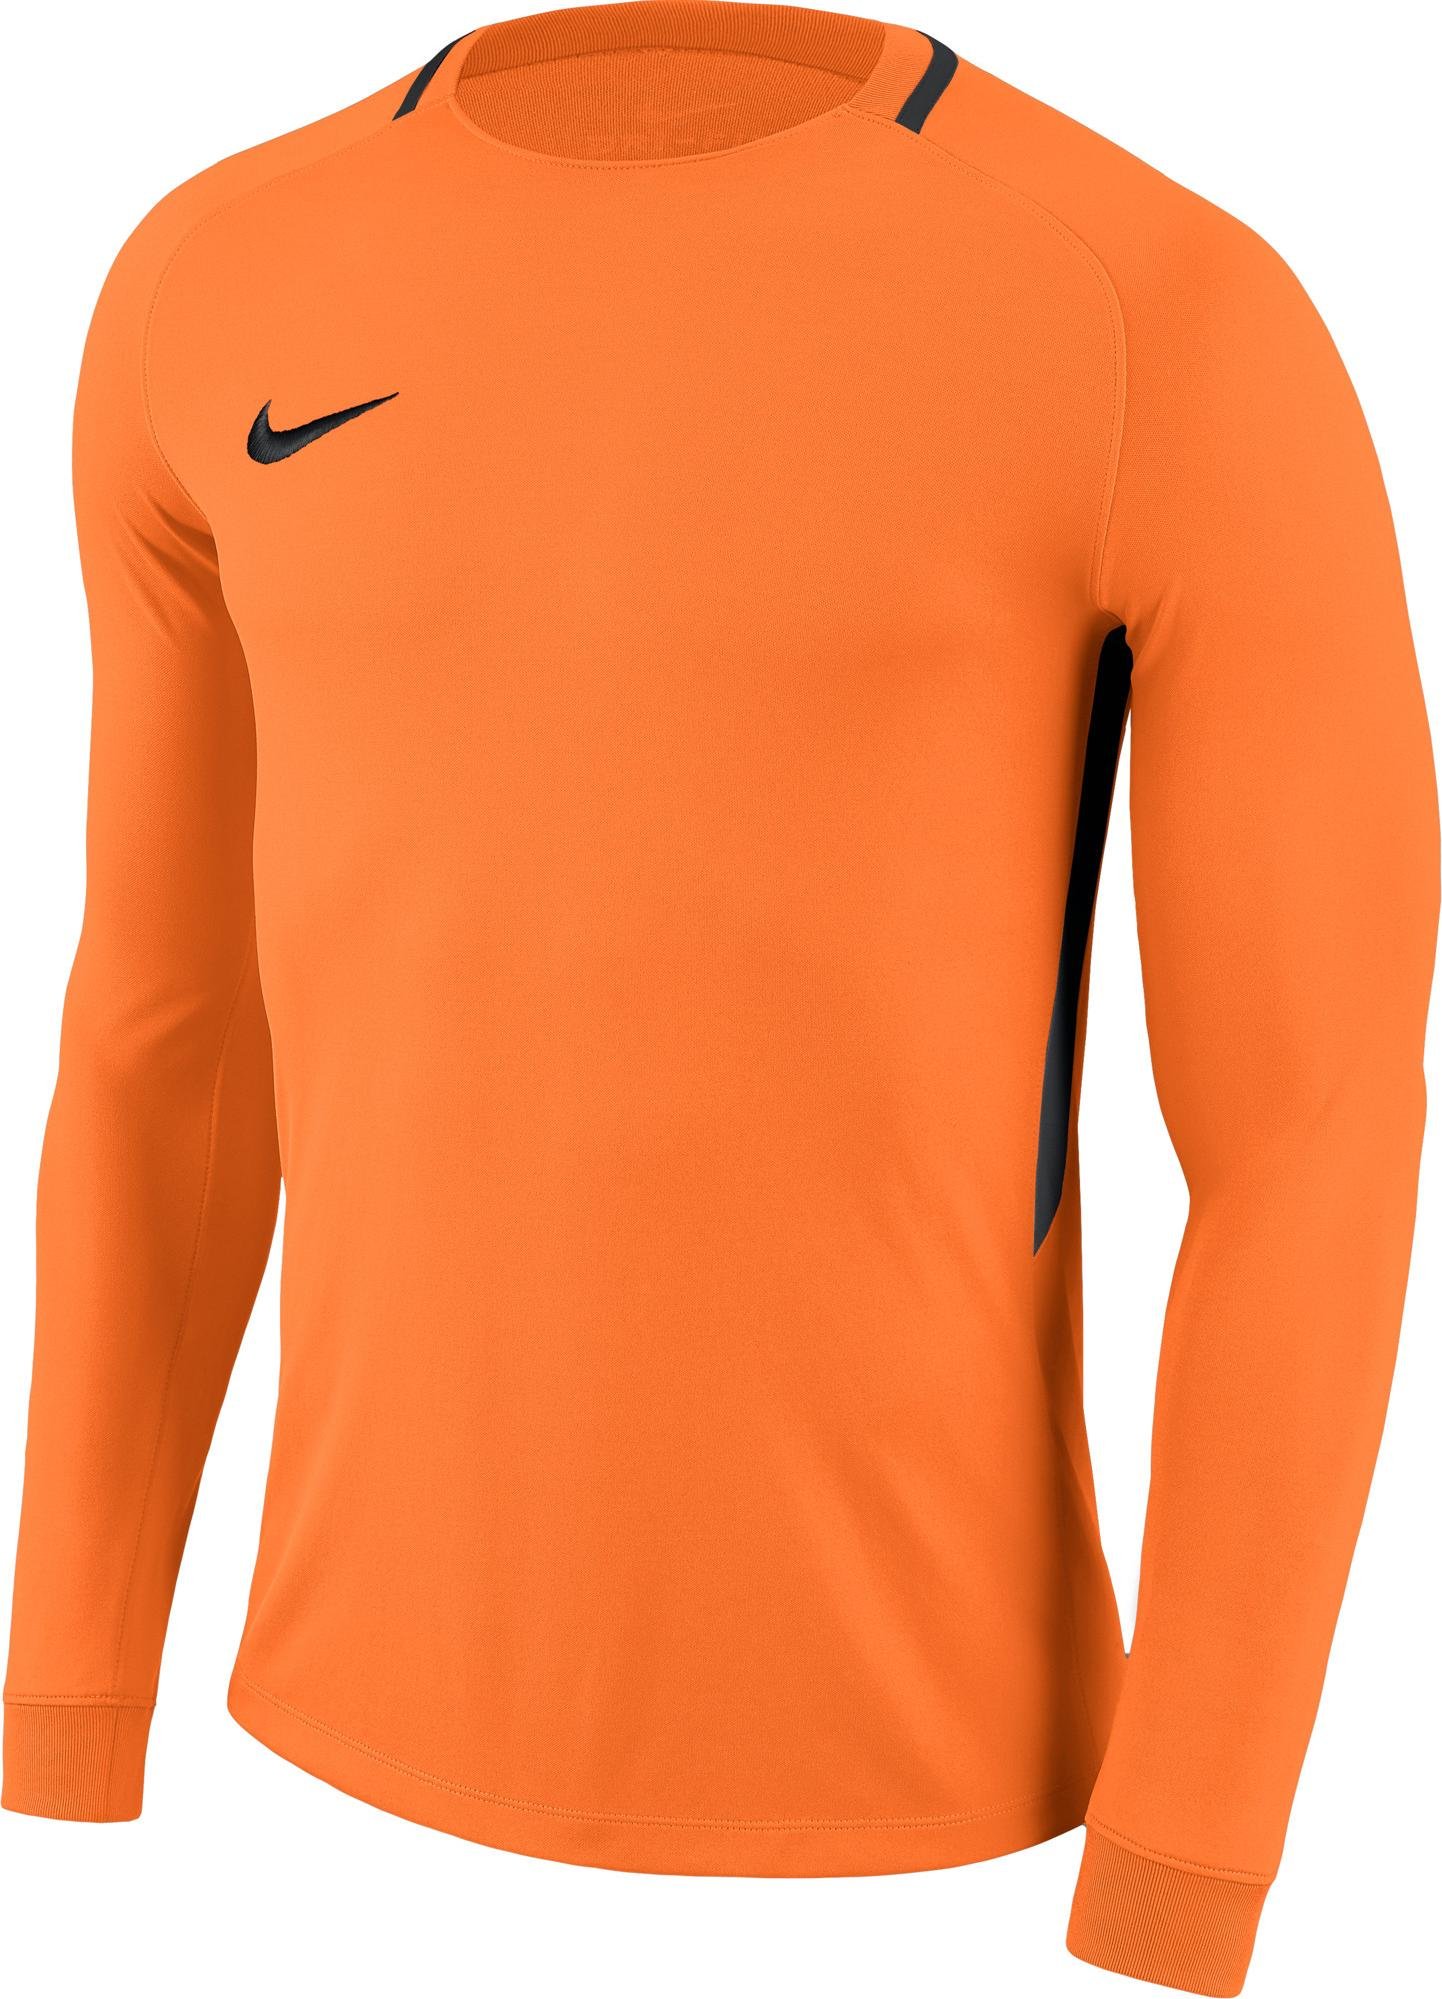 Maillot à manches longues Nike Y NK DRY PARK III JSY LS GK